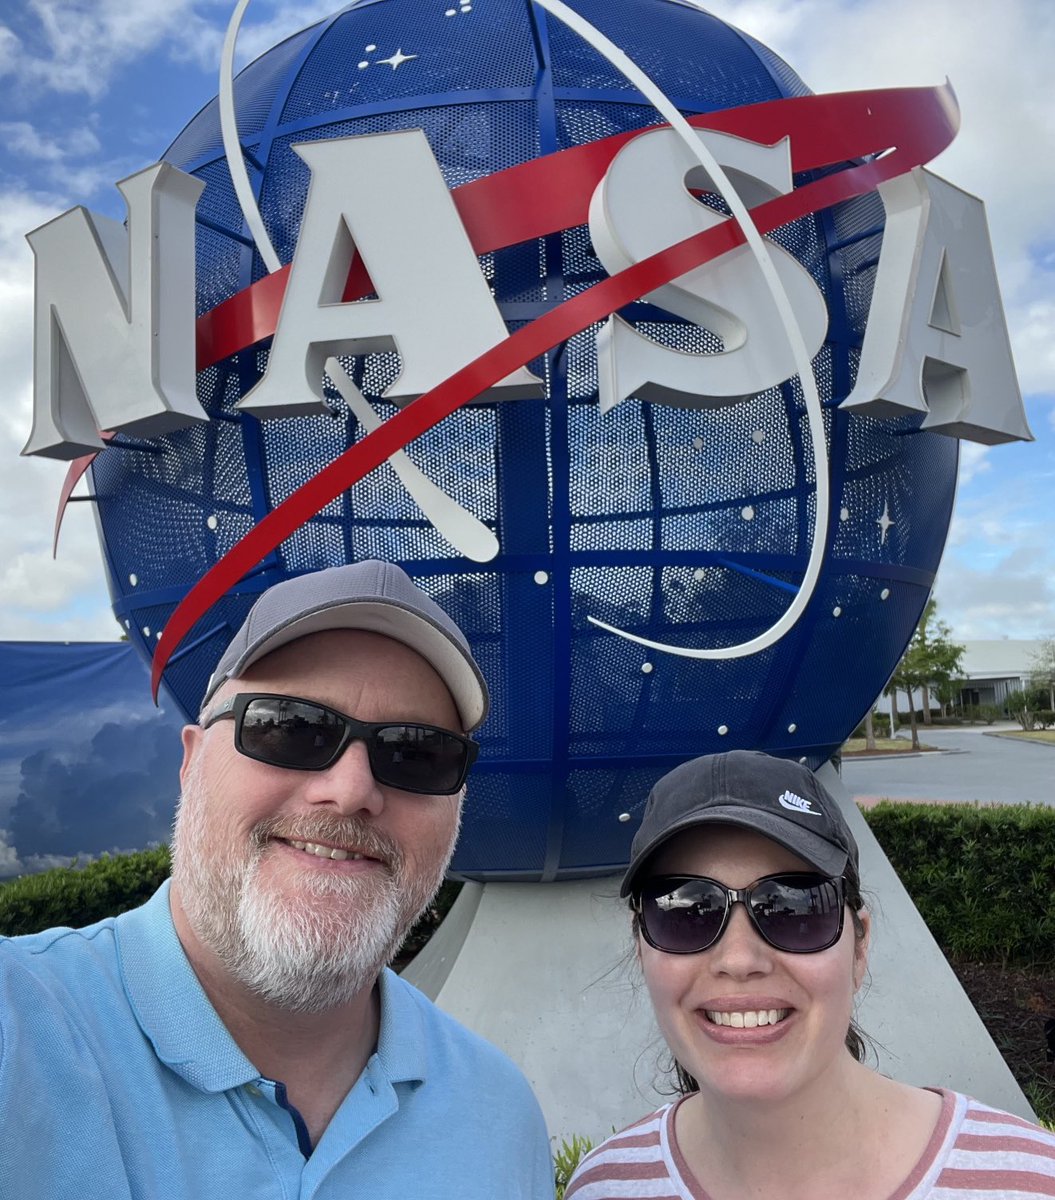 Yesterday we had the opportunity to tour one of the coolest places we’ve ever been. #NASA #KennedySpaceCenter